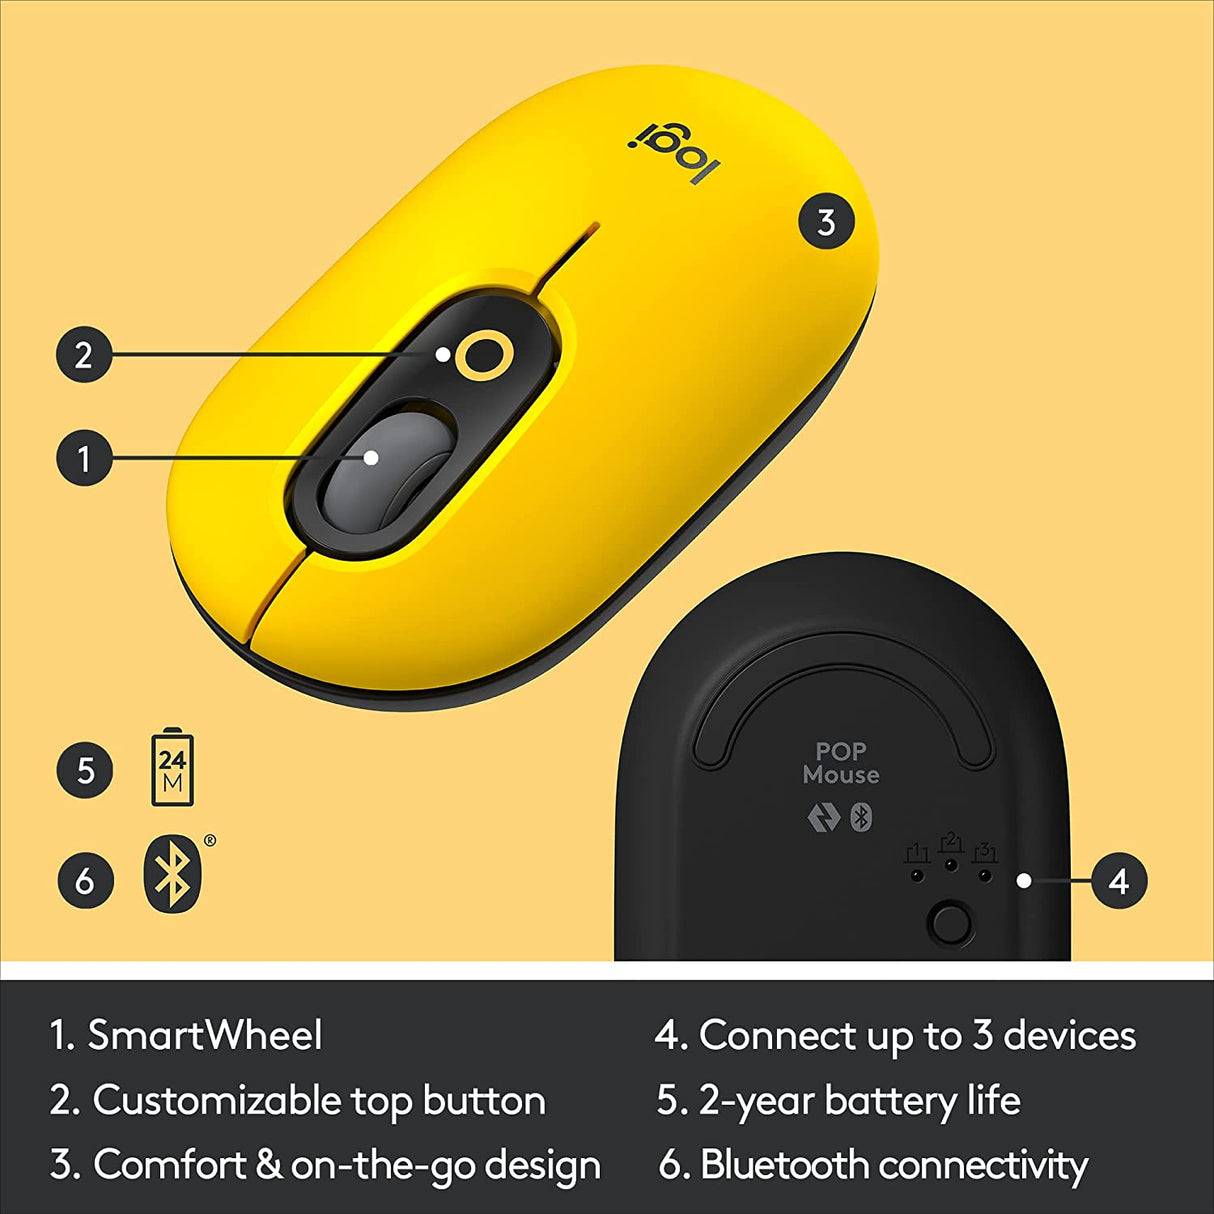  Logitech POP Mouse, Wireless Mouse with Customizable Emojis,  SilentTouch Technology, Precision/Speed Scroll, Compact Design, Bluetooth,  Multi-Device, OS Compatible - Cosmos : Electronics